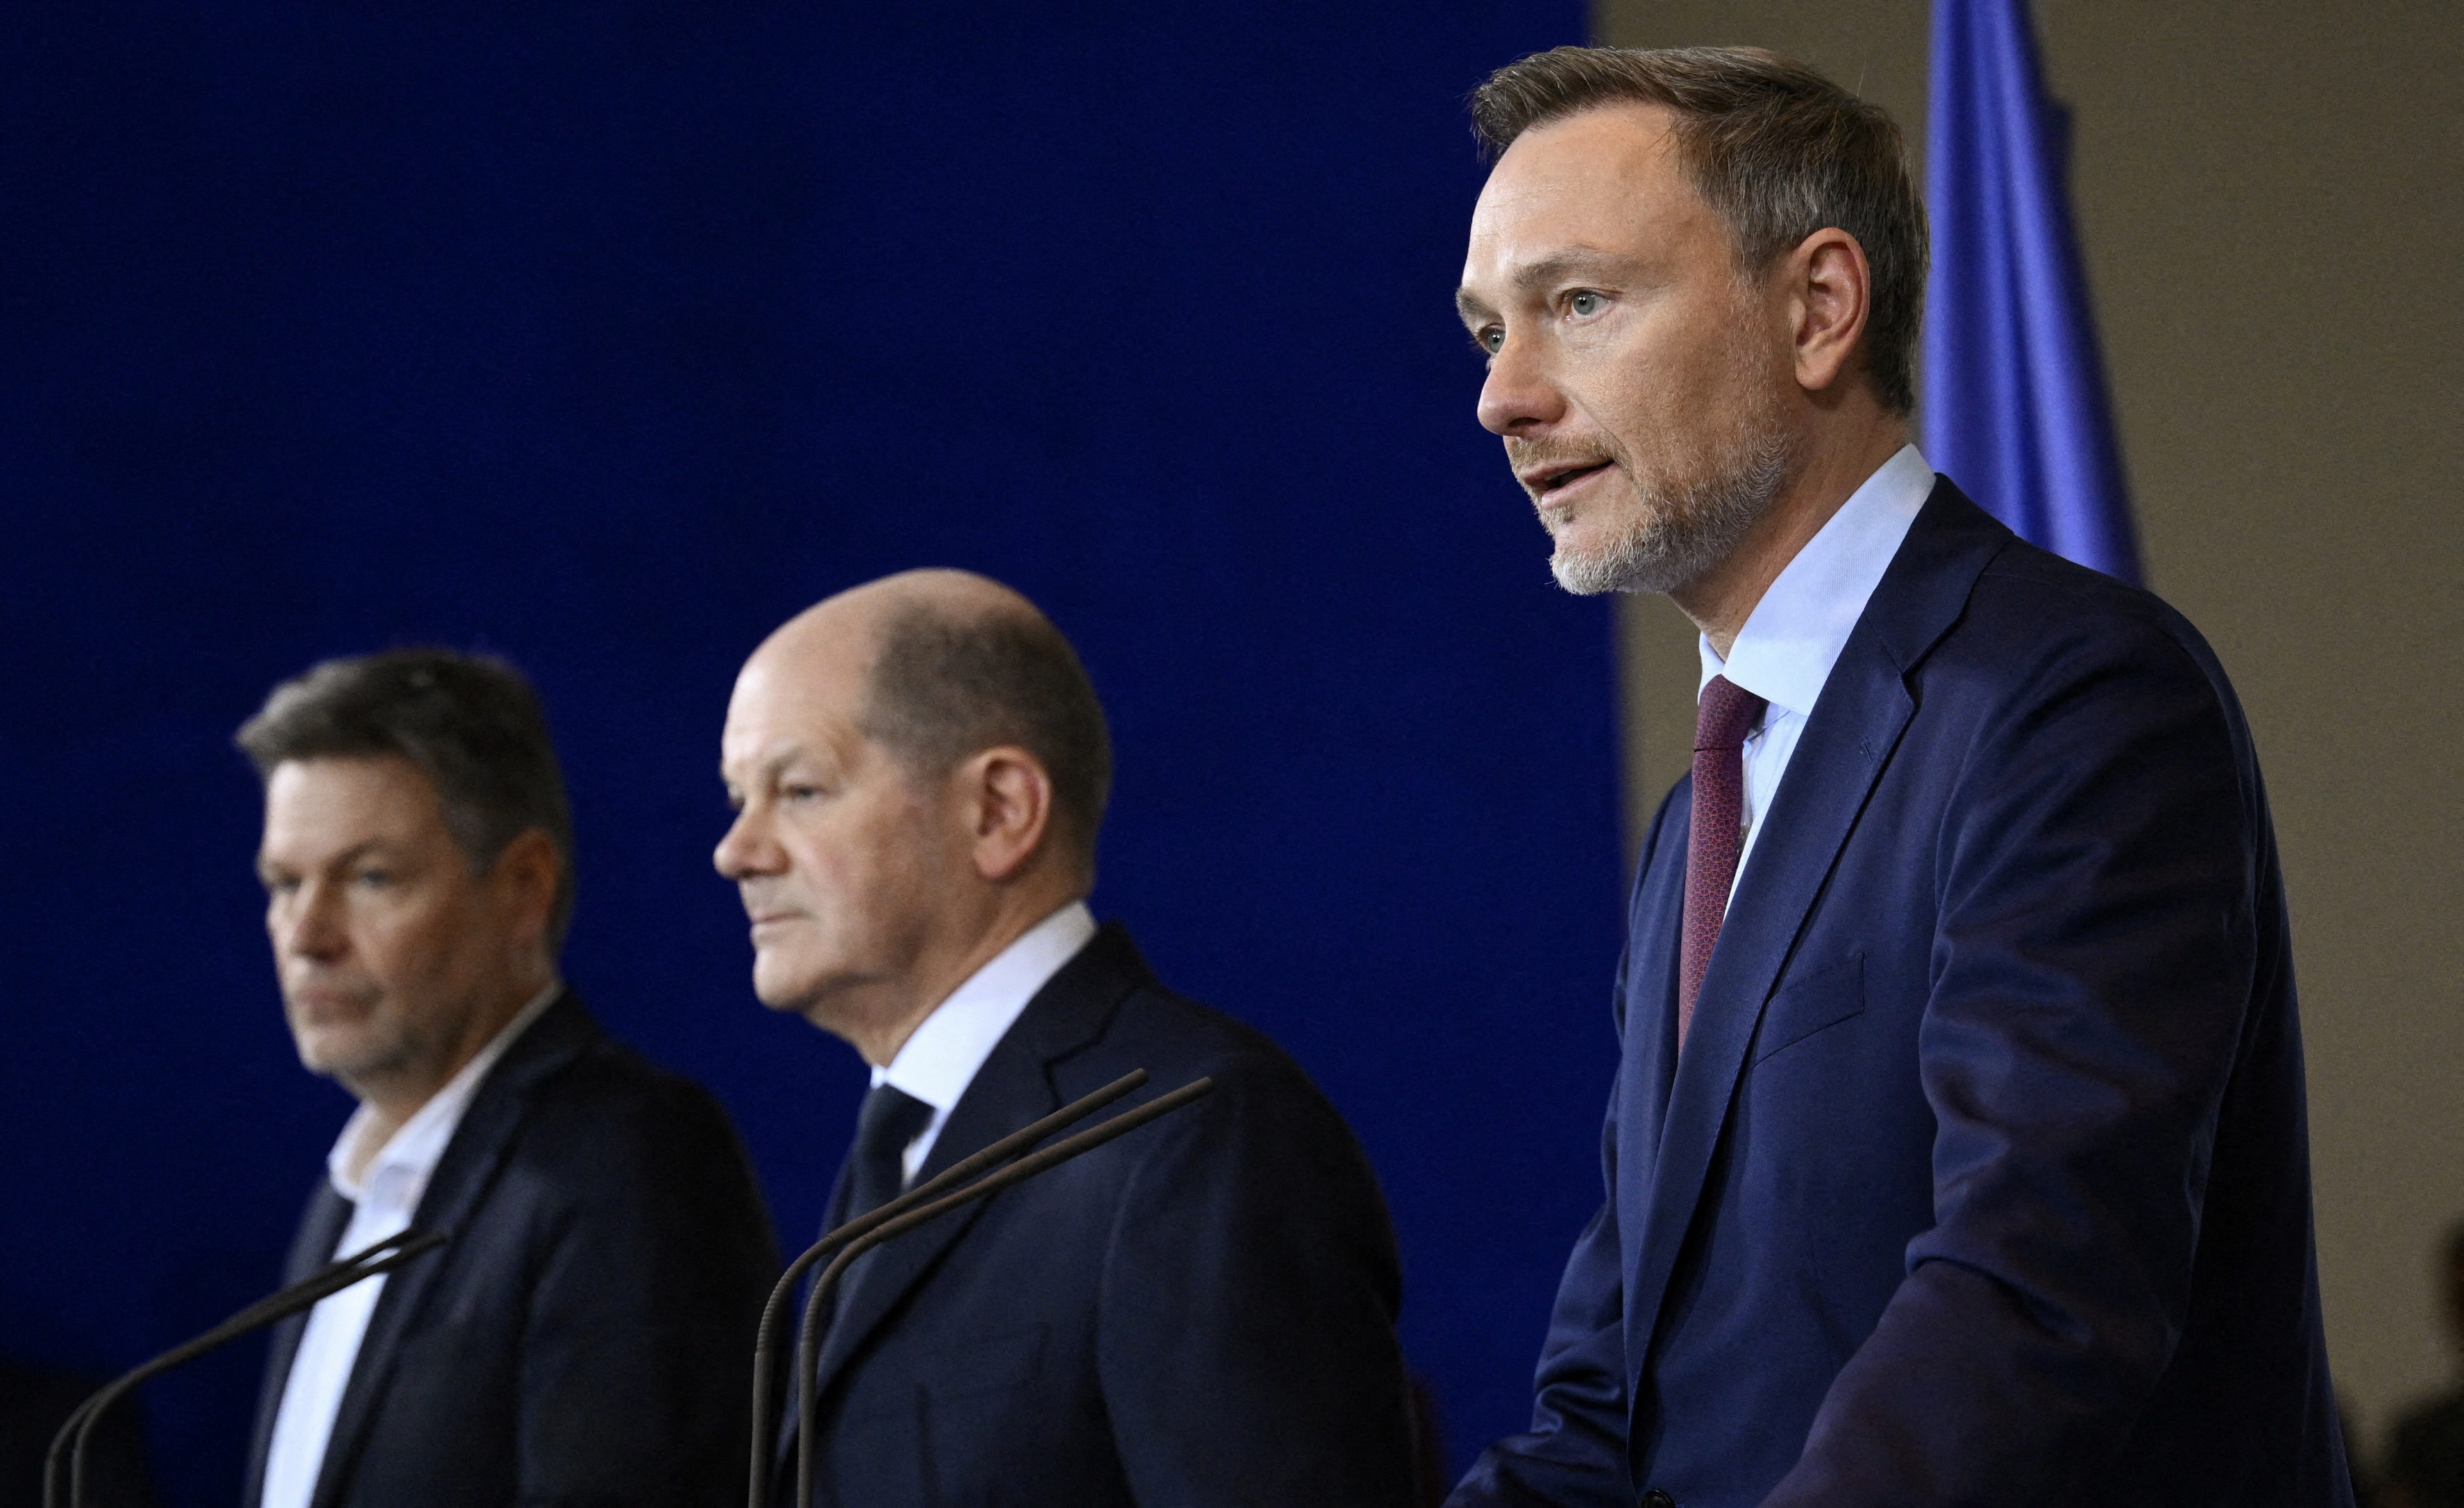 German Court deals blow to the so-called Ampel coalition of Chancellor Scholz